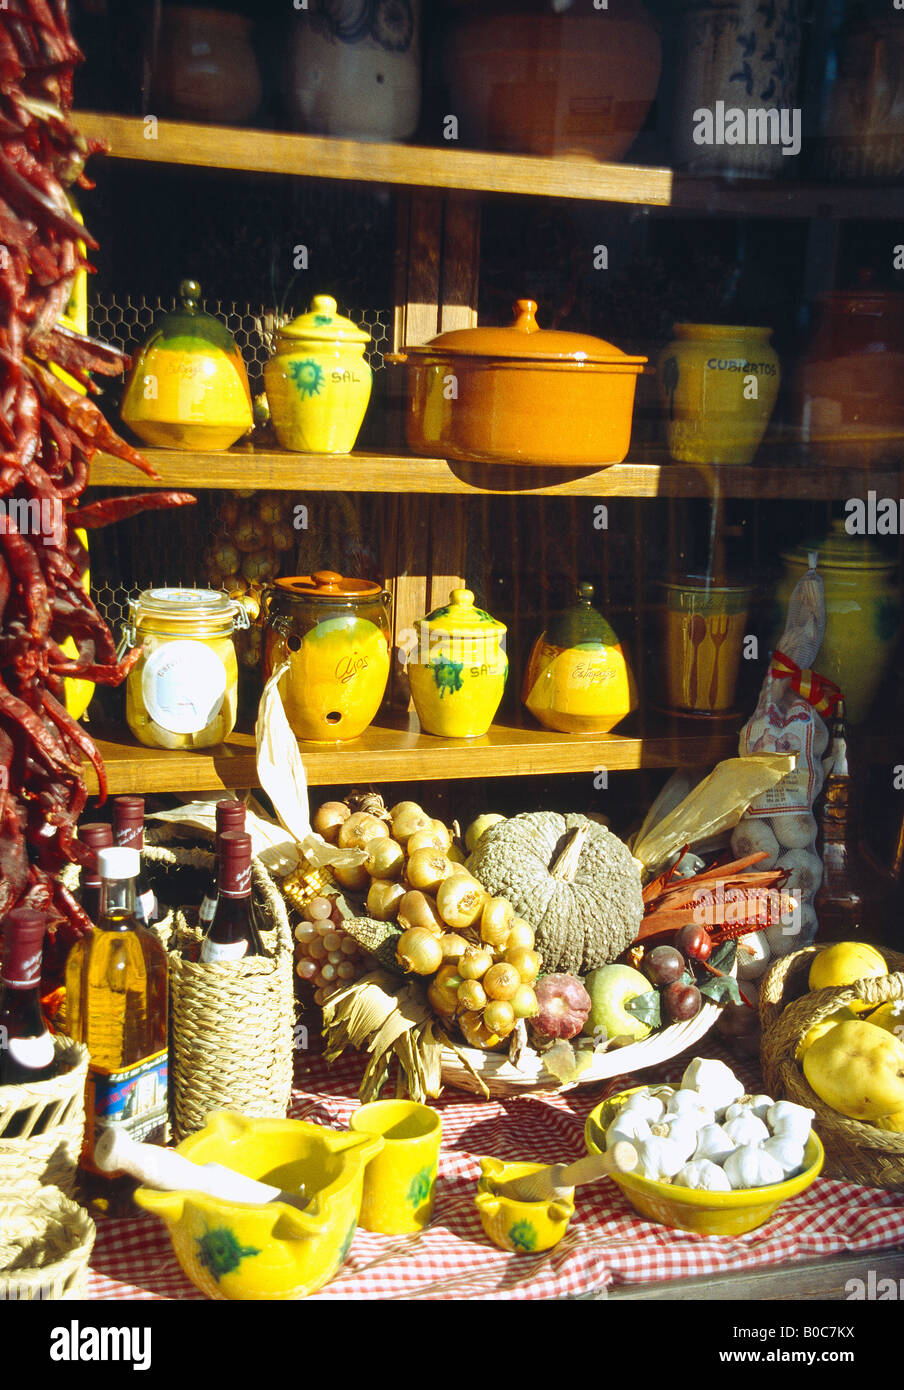 Typical products: handicrafts and food in shop window. Chinchon. Madrid province. Spain. Stock Photo